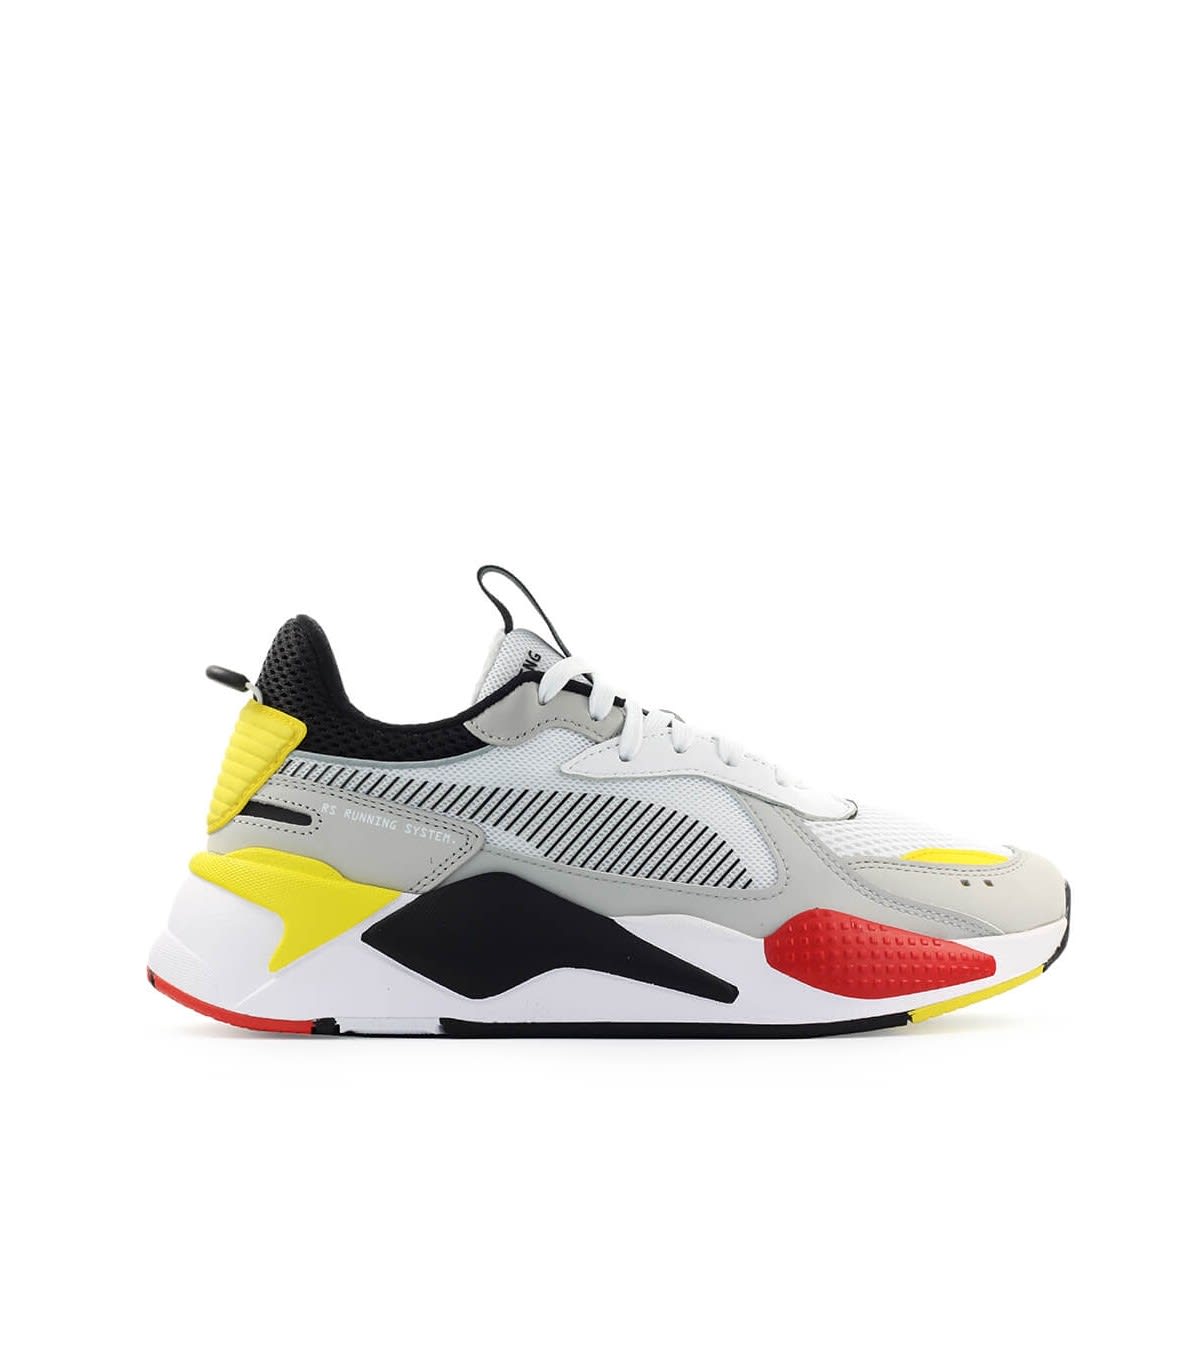 PUMA RS-X TOYS BLACK YELLOW RED SNEAKER,11221967